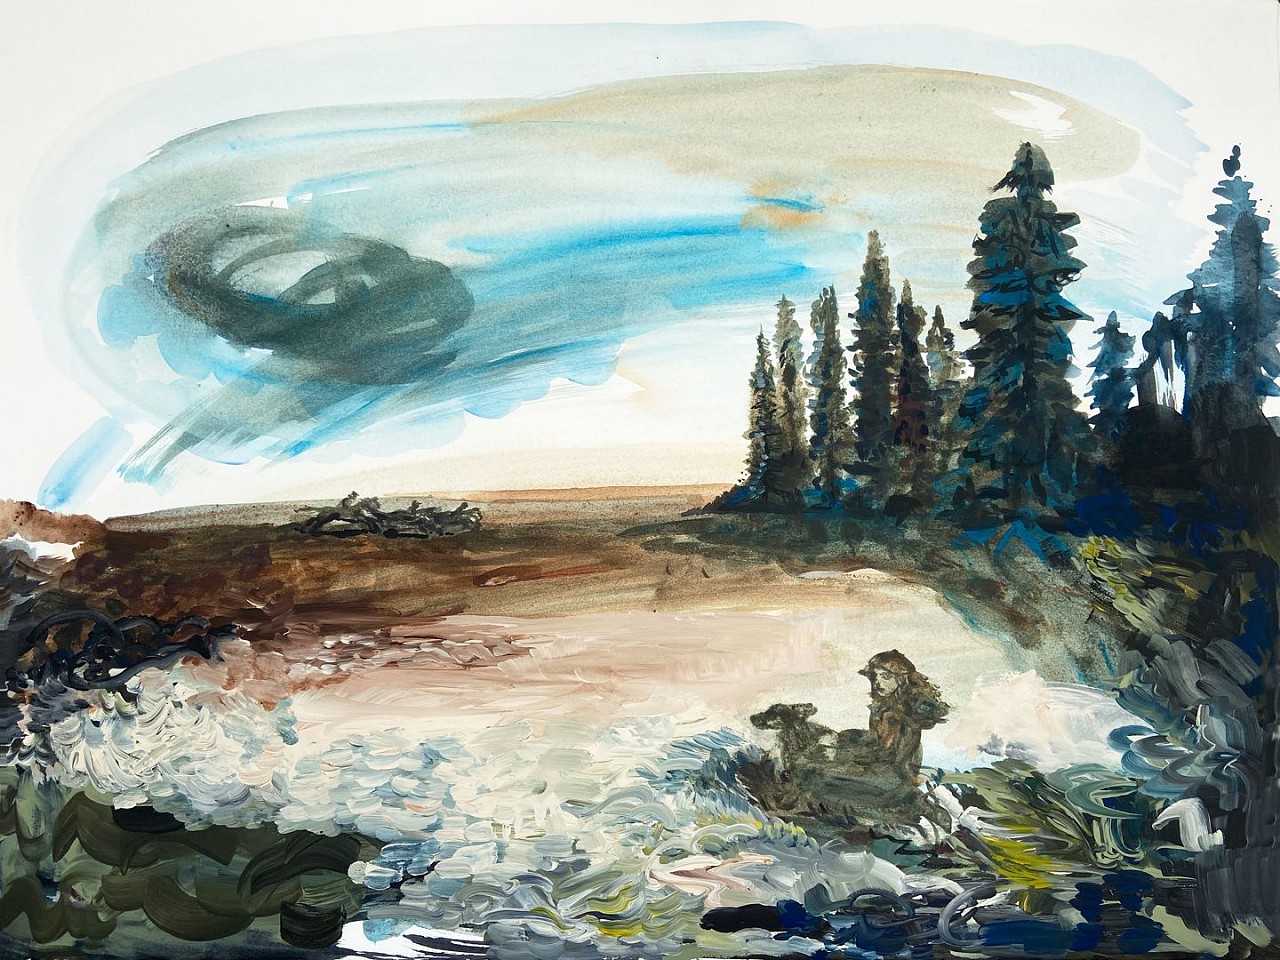 Suzy Spence
Fading Landscape (Girl with Hound), 2021
SPENC322
flashe and acrylic on paper, 22 x 30 inches